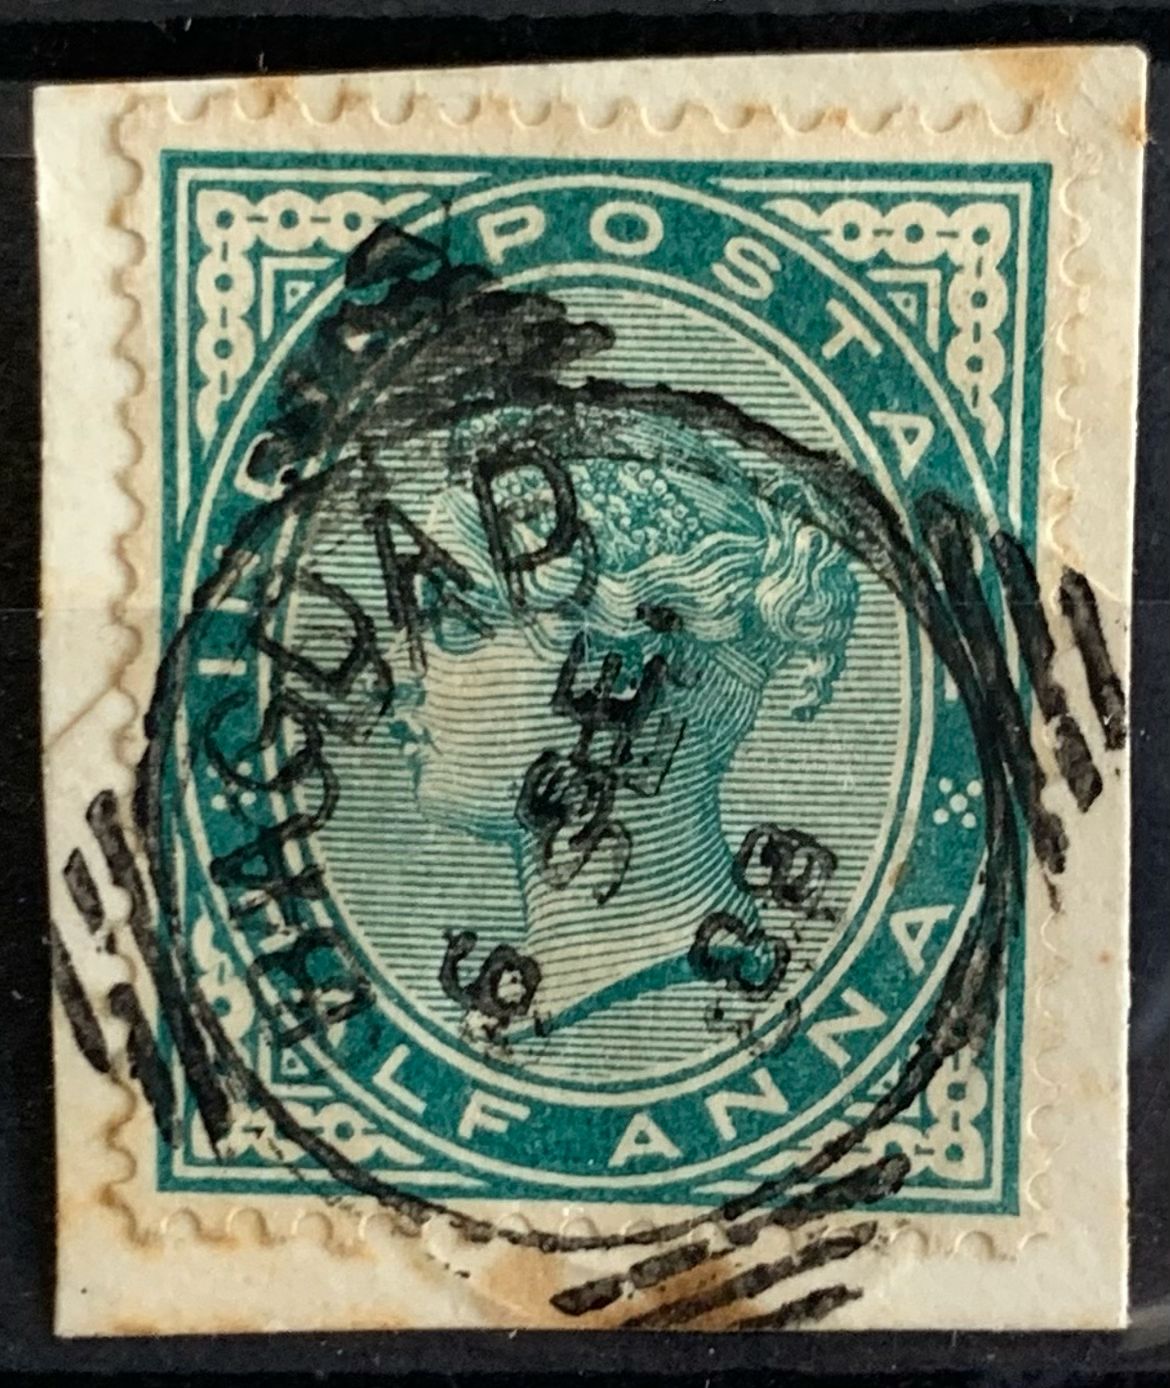 India 1882 QV 1/2a Used Abroad in BAGDAD Fine Cancelled